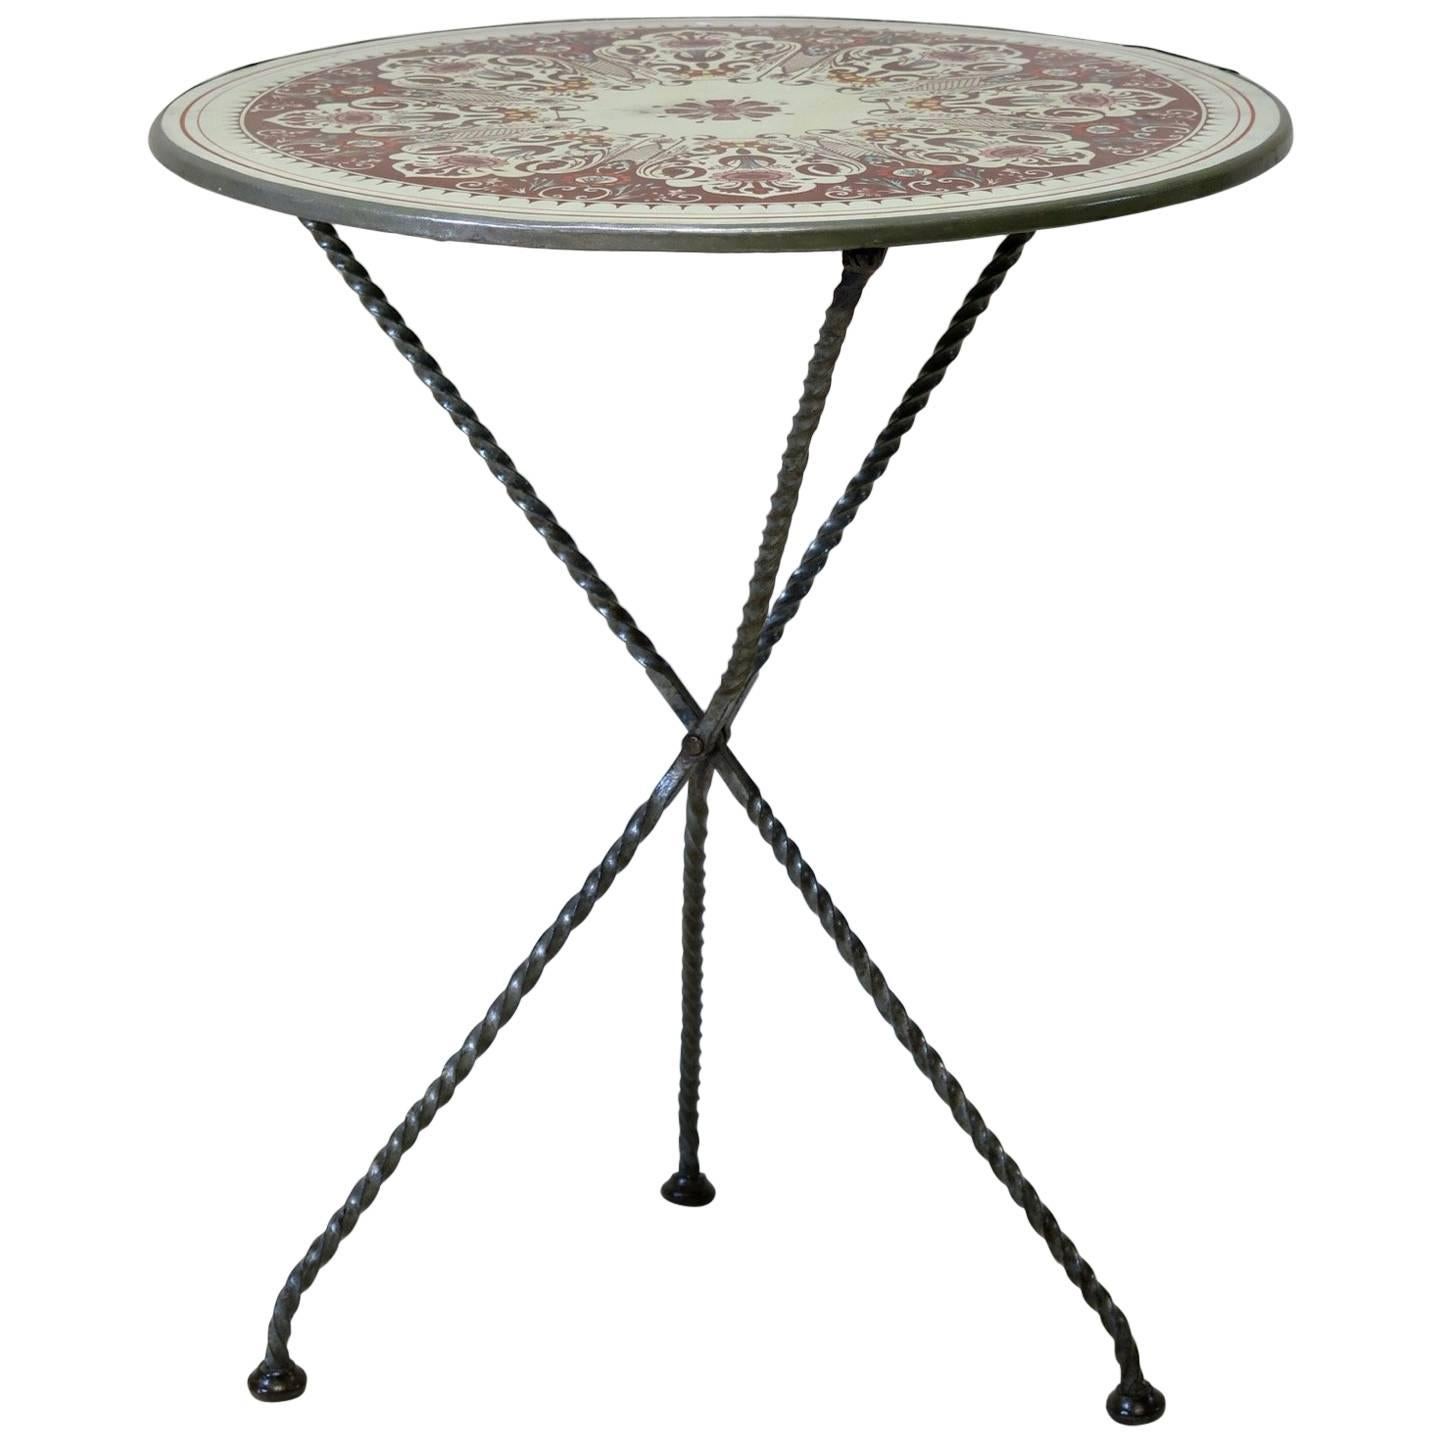 French 1920s Enameled Tripod Table